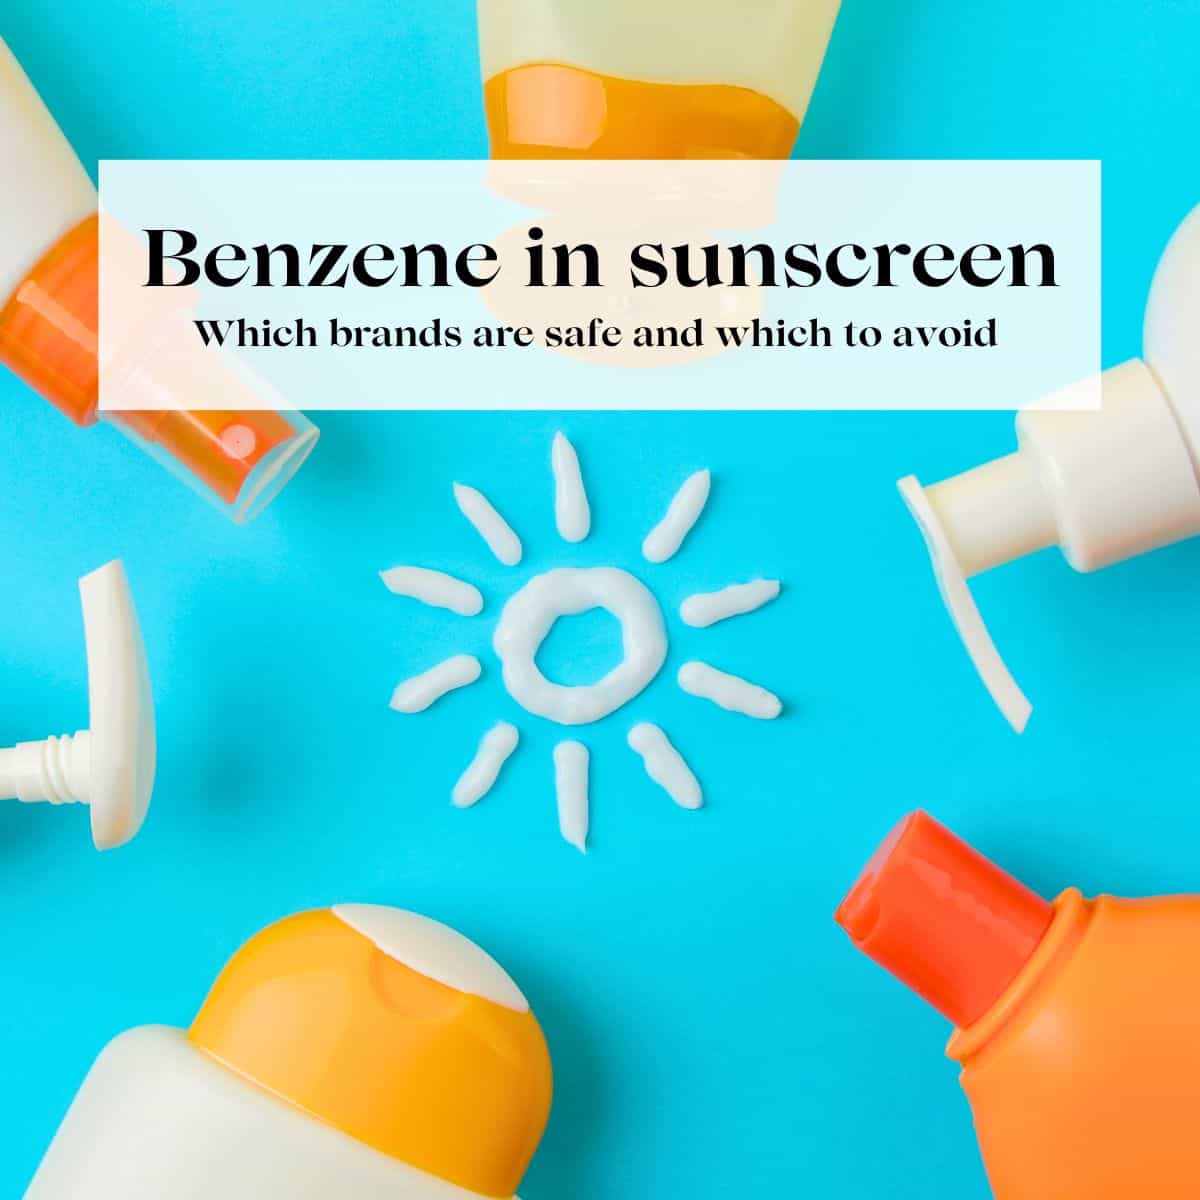 A bunch of different sunscreens with the title "benzene in sunscreen" over them.